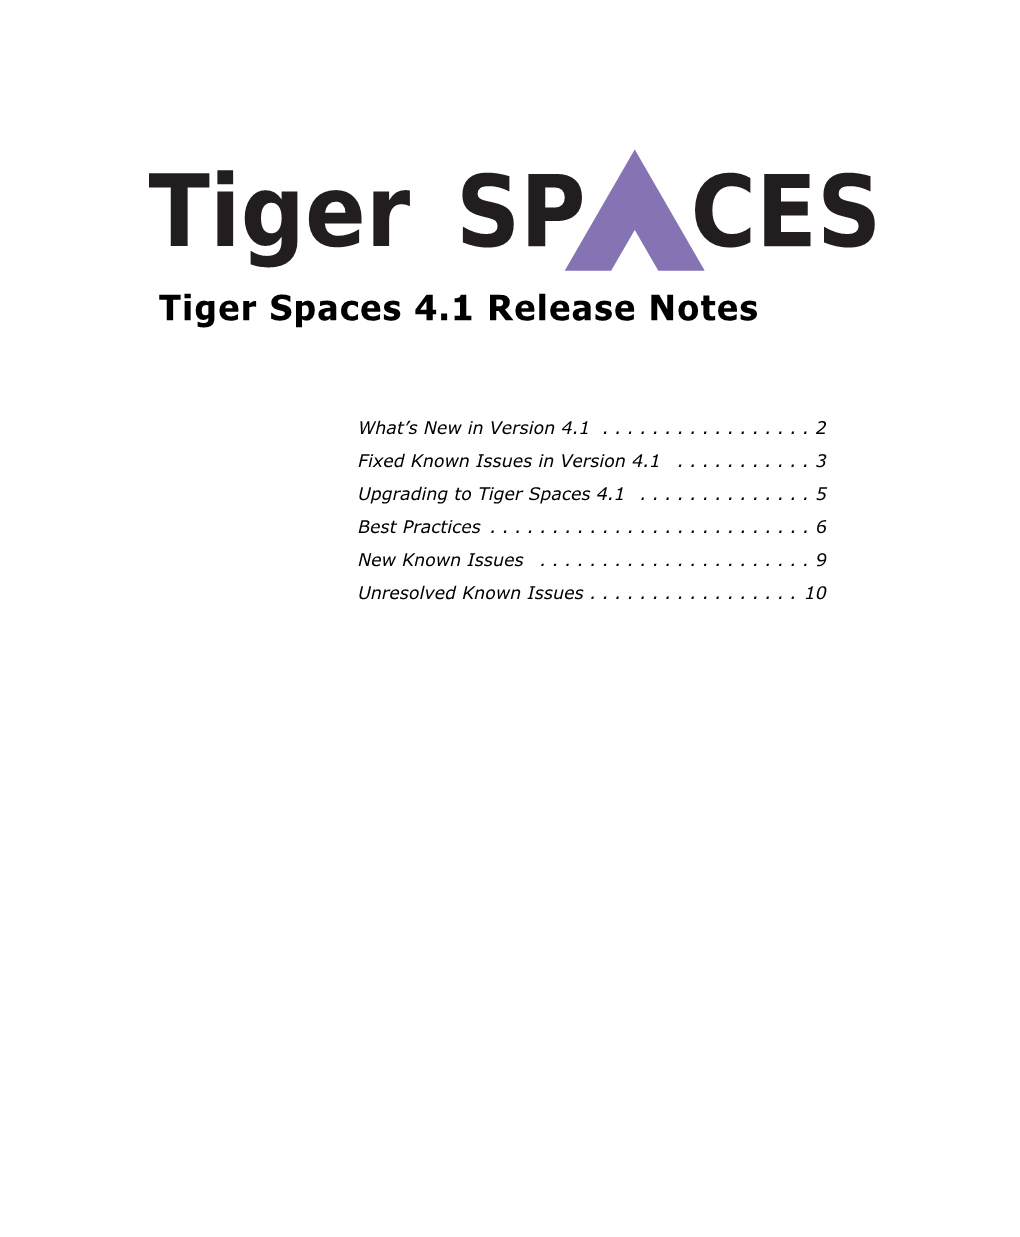 Tiger Spaces 4.1 Release Notes